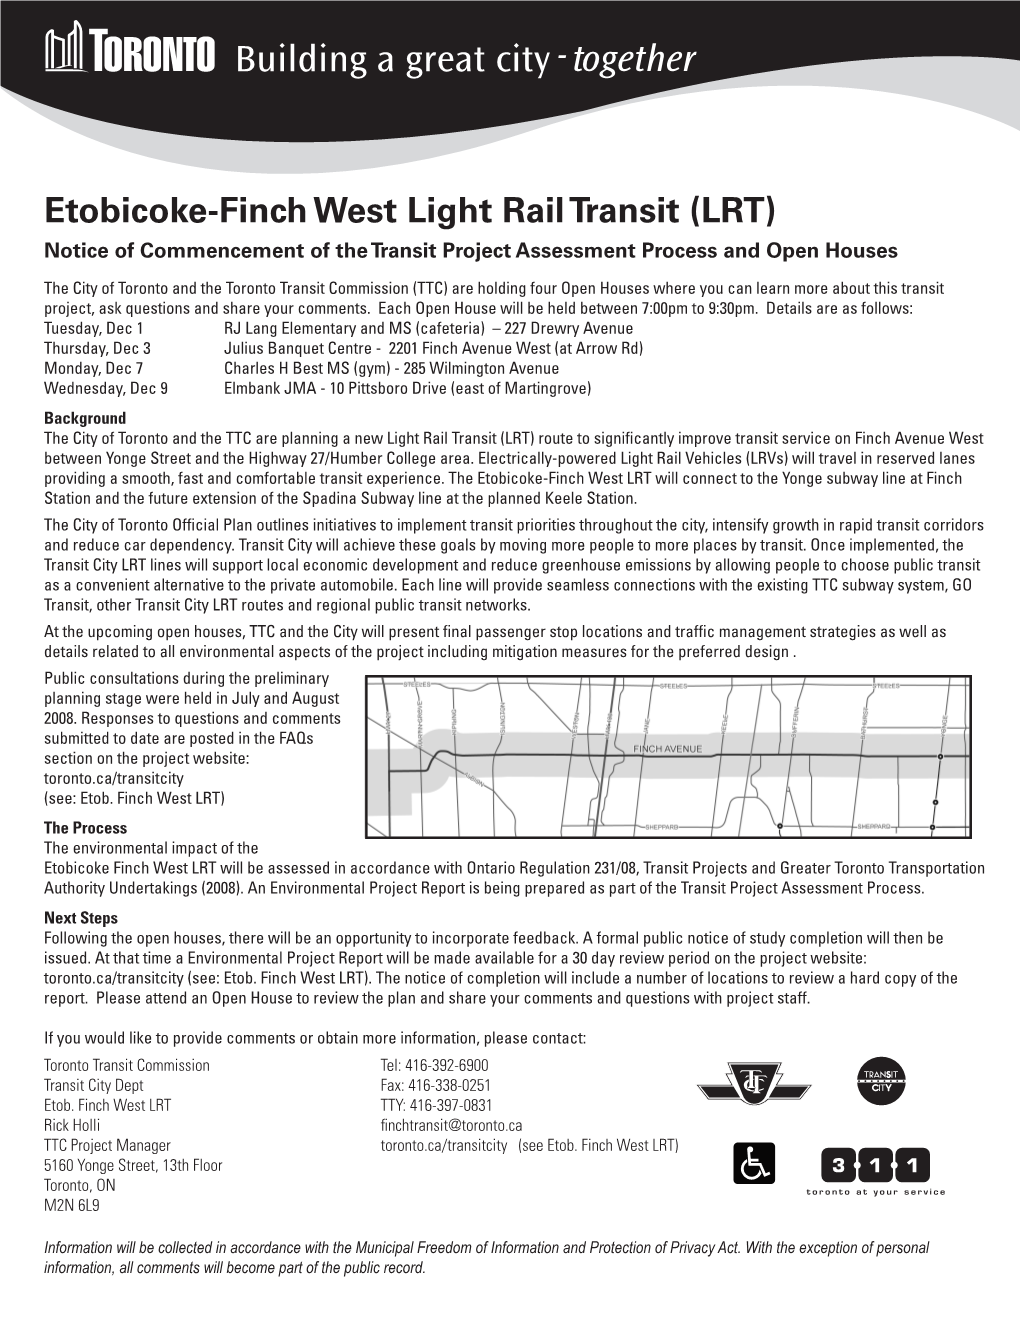 Etobicoke-Finch West Light Rail Transit (LRT) Notice of Commencement of the Transit Project Assessment Process and Open Houses